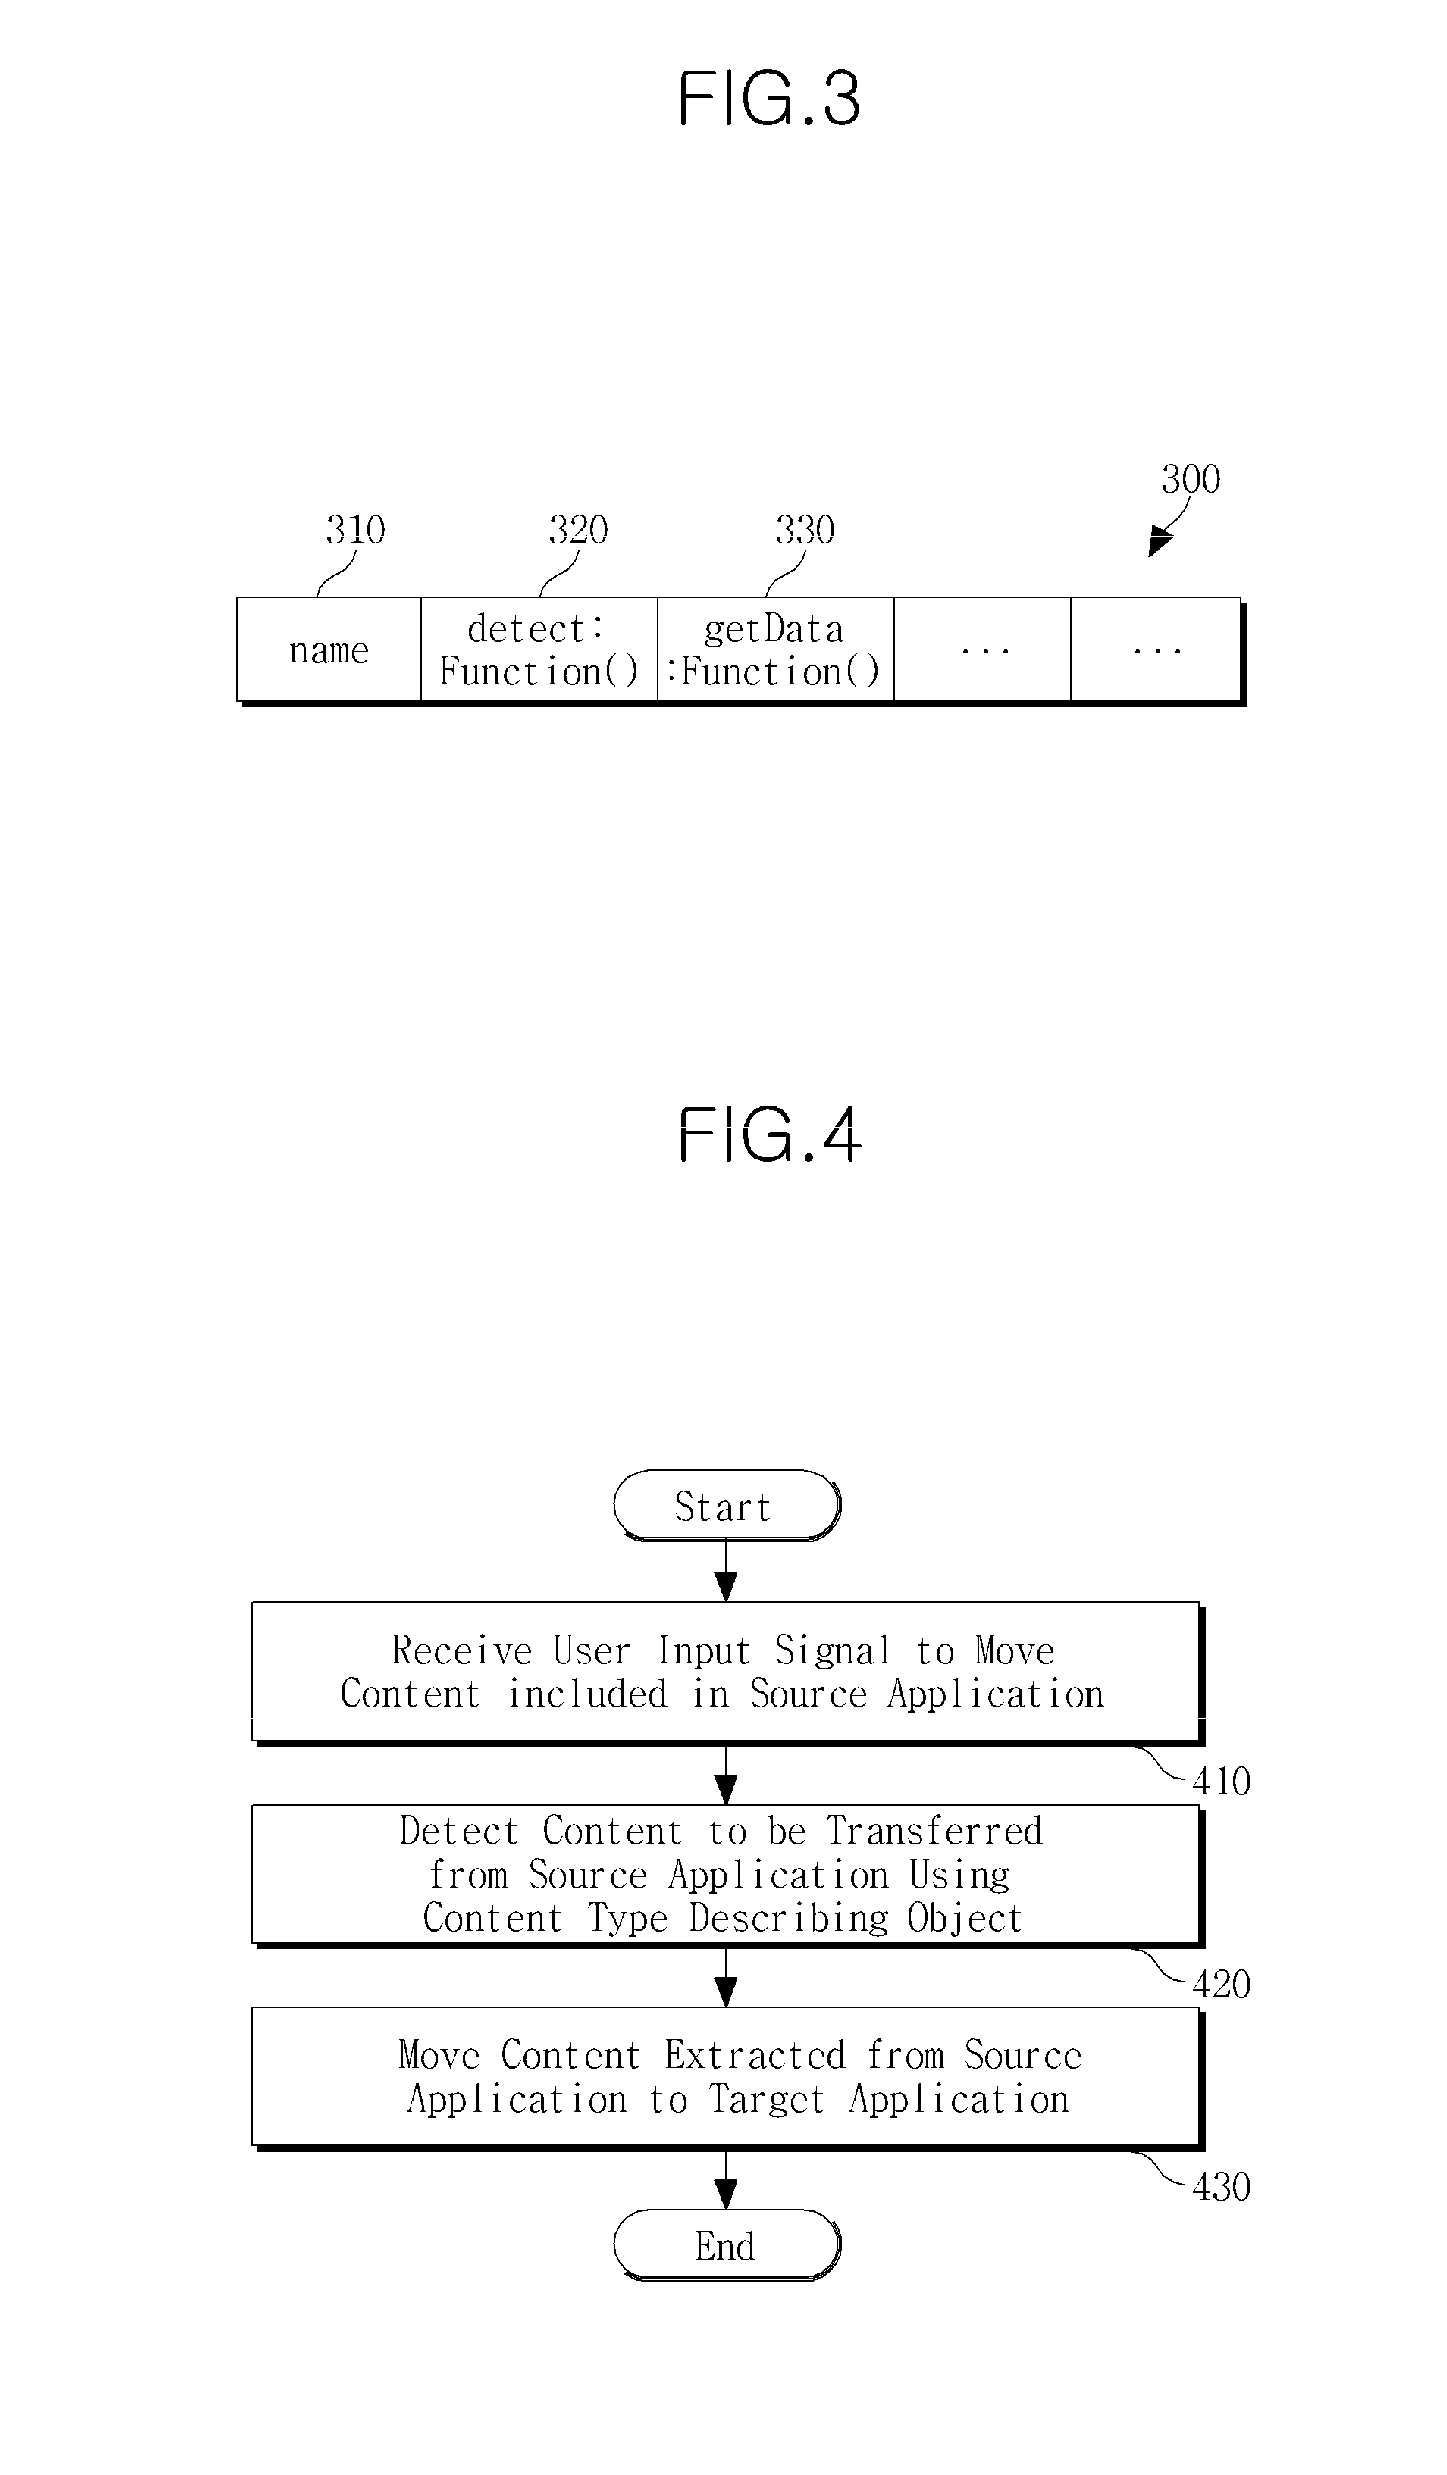 Apparatus and method of delivering content between applications